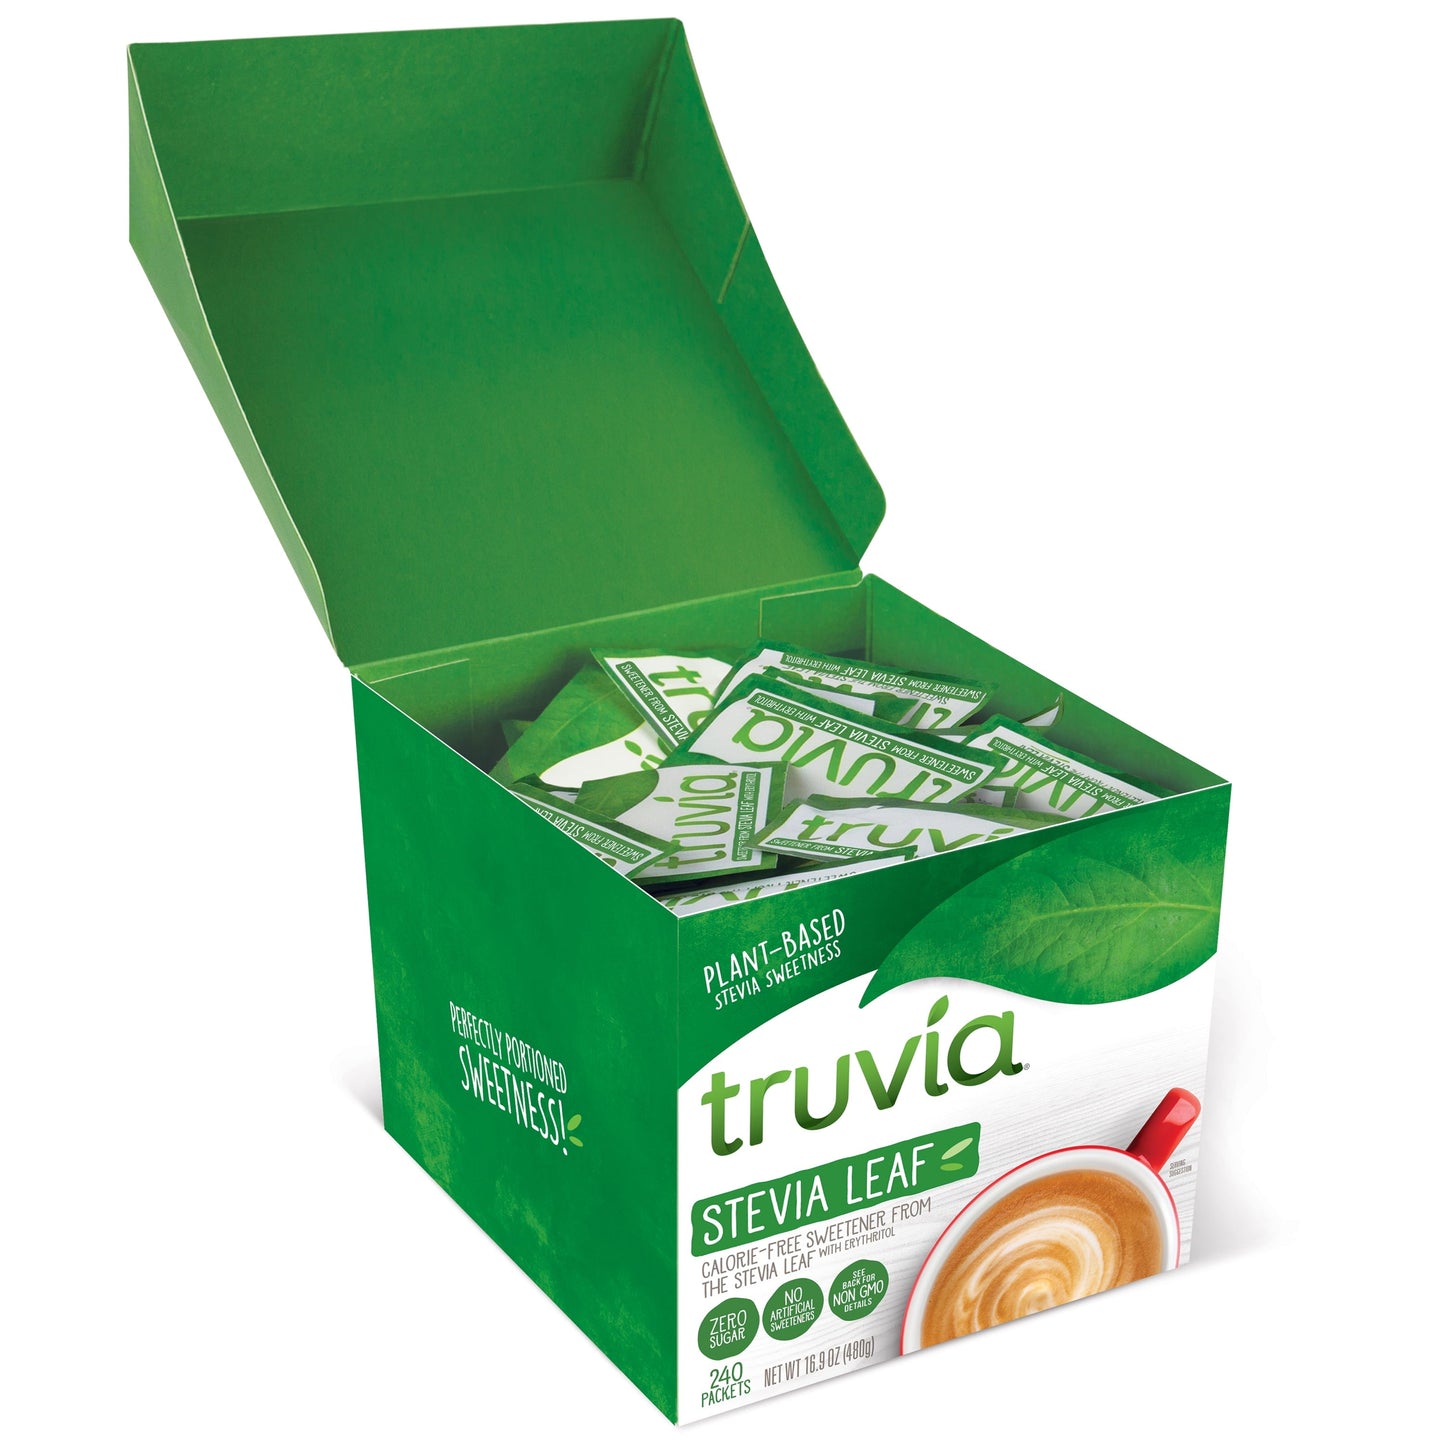 Truvia Original Calorie-Free Sweetener from the Stevia Leaf Packets, 240 Count (16.9 oz Carton)